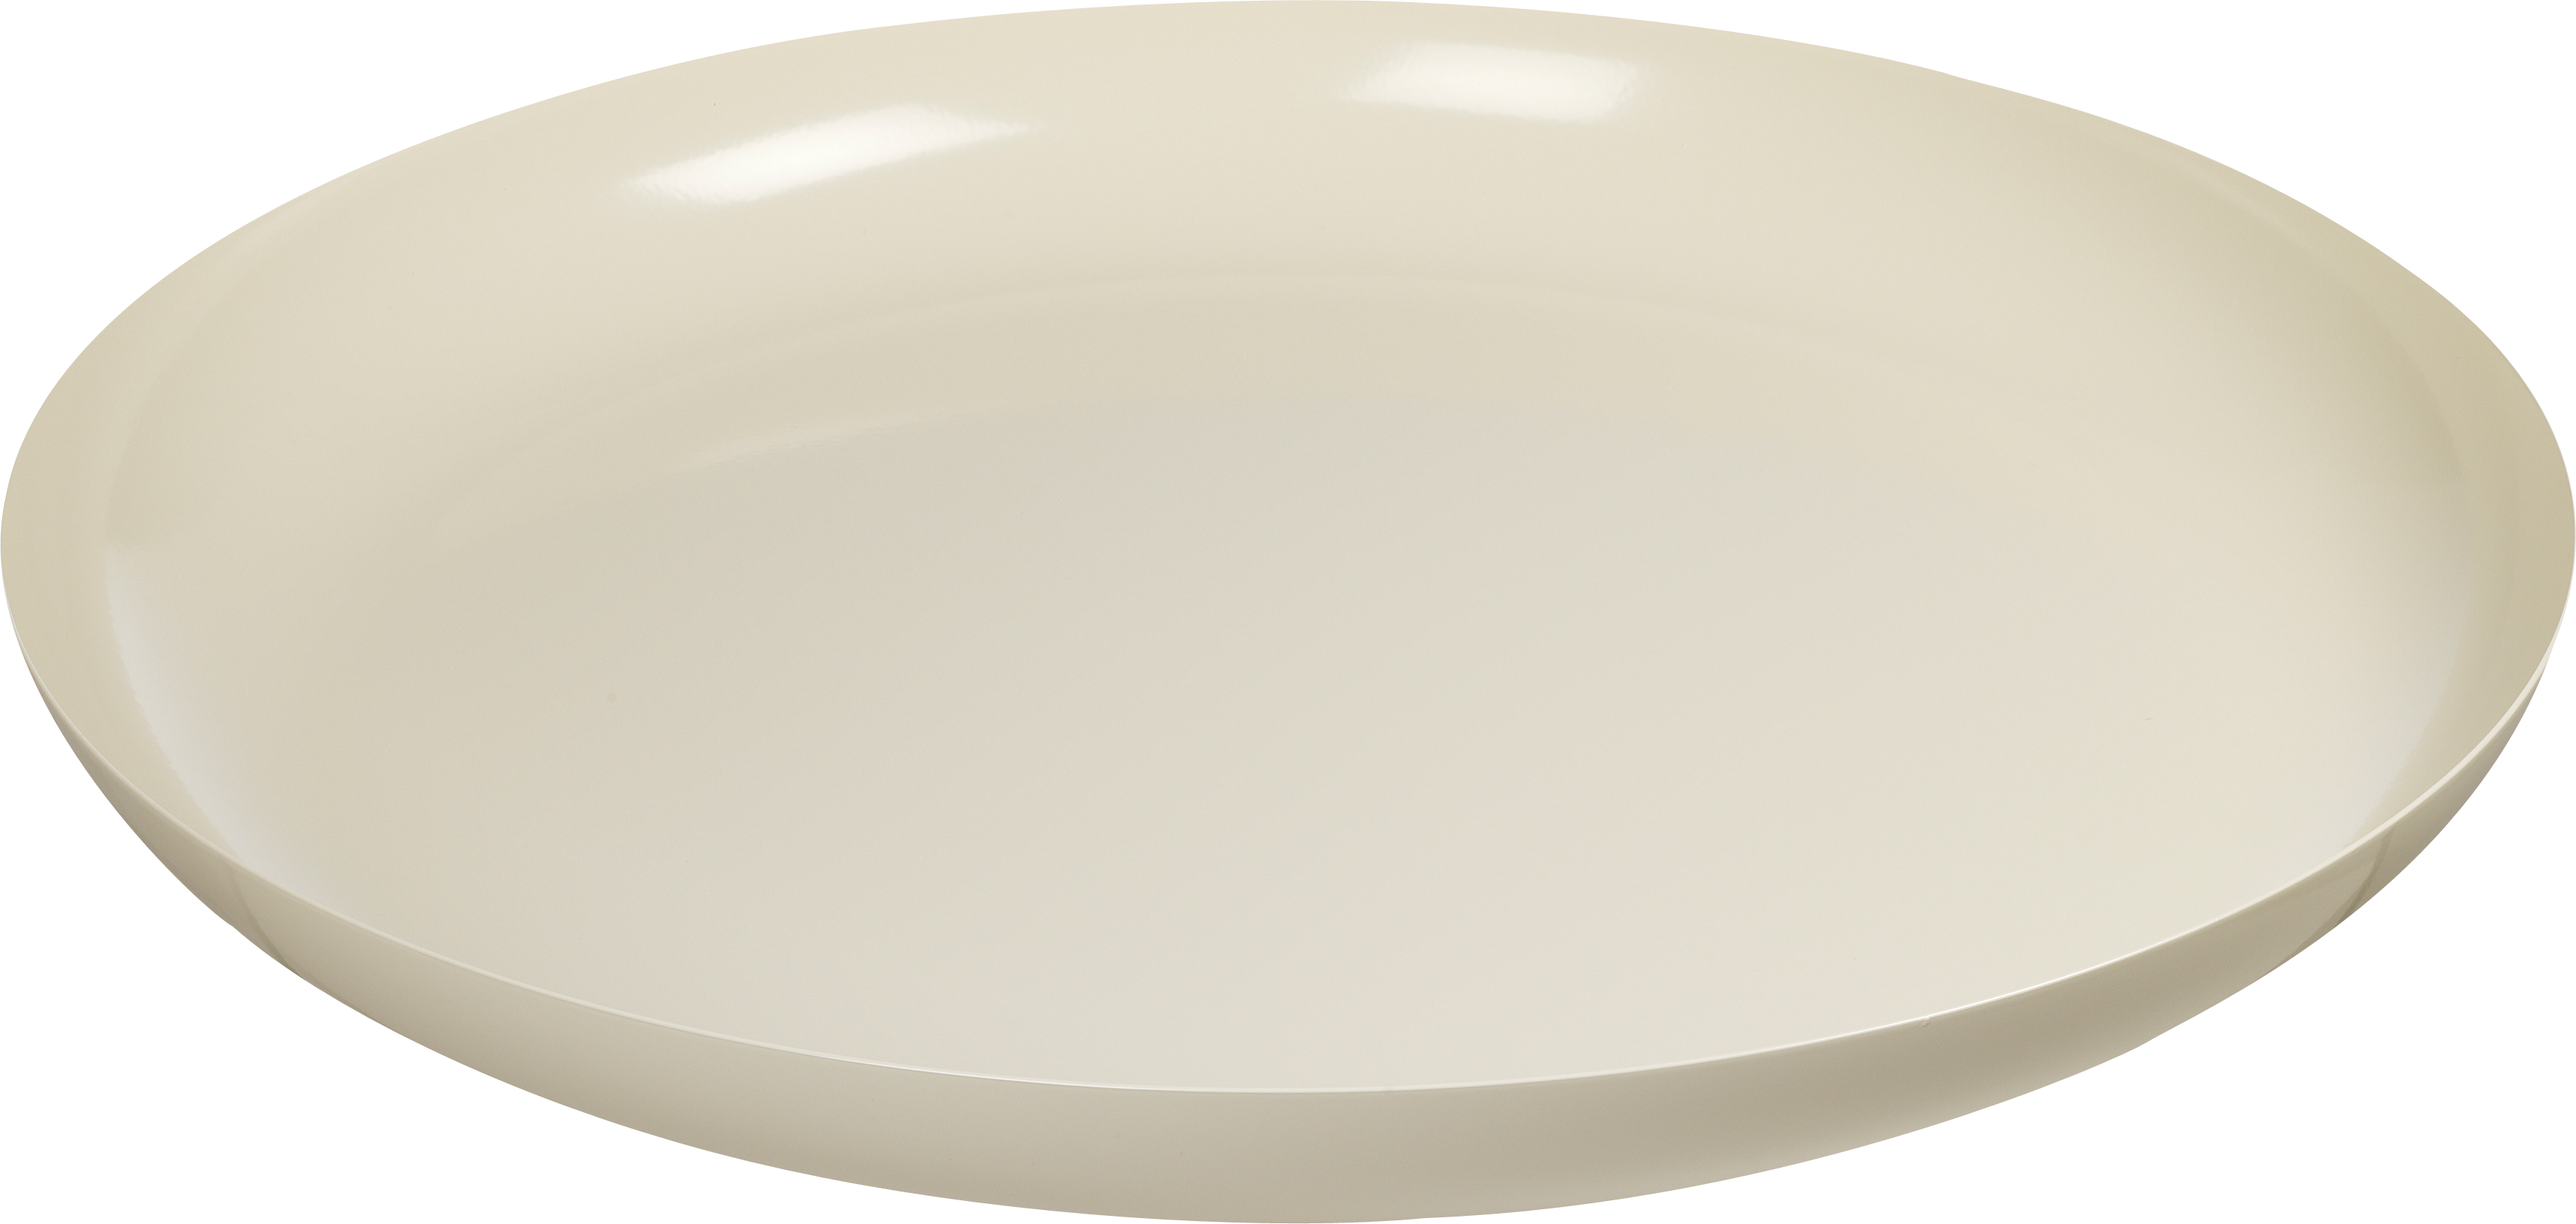 Plates Png